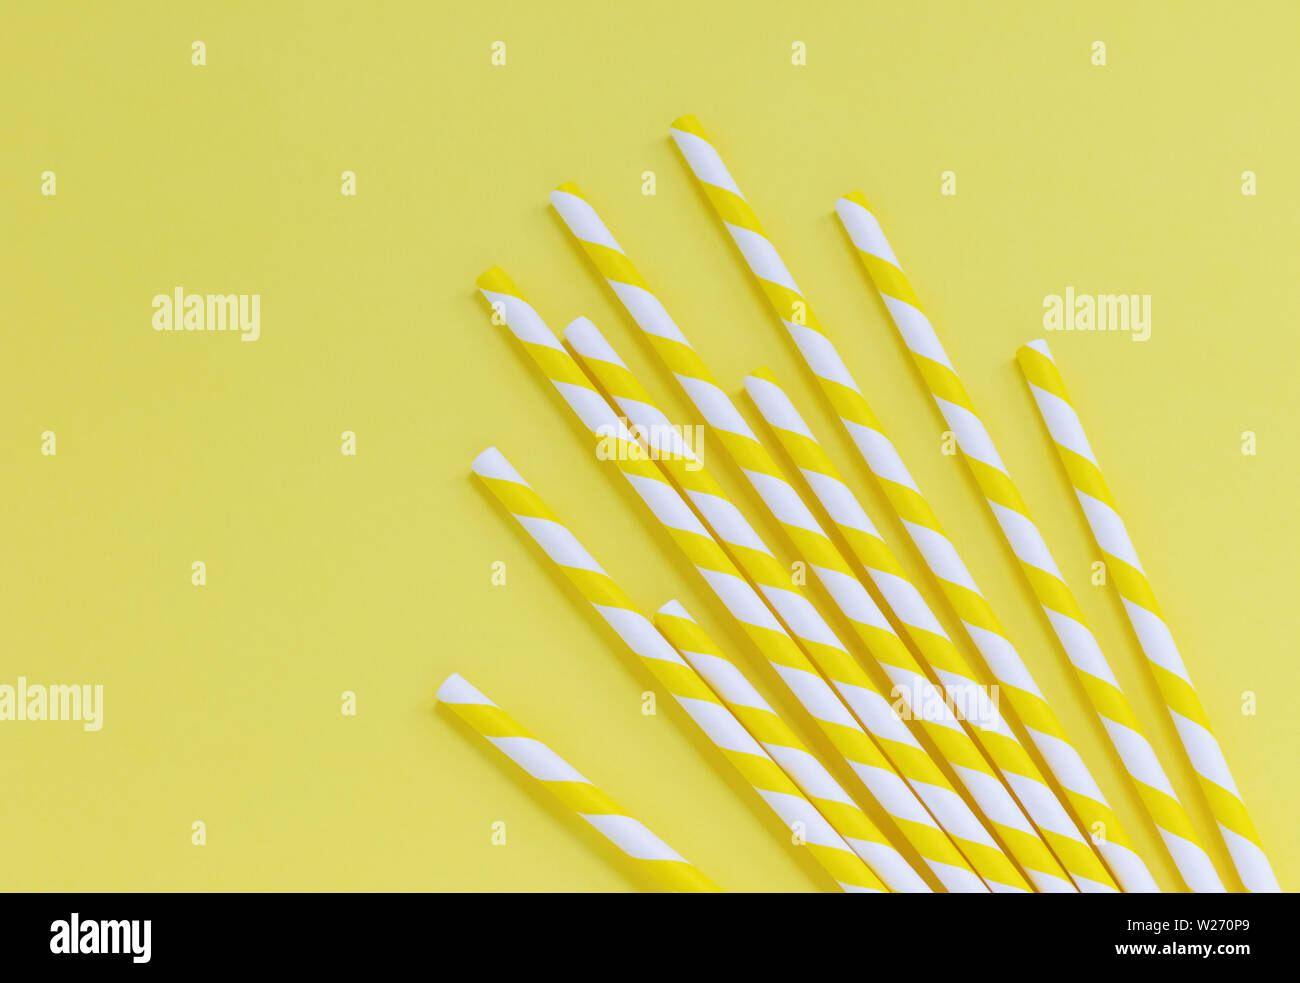 Yellow striped paper straws on a yellow background. Flat lay with copy space Stock Photo